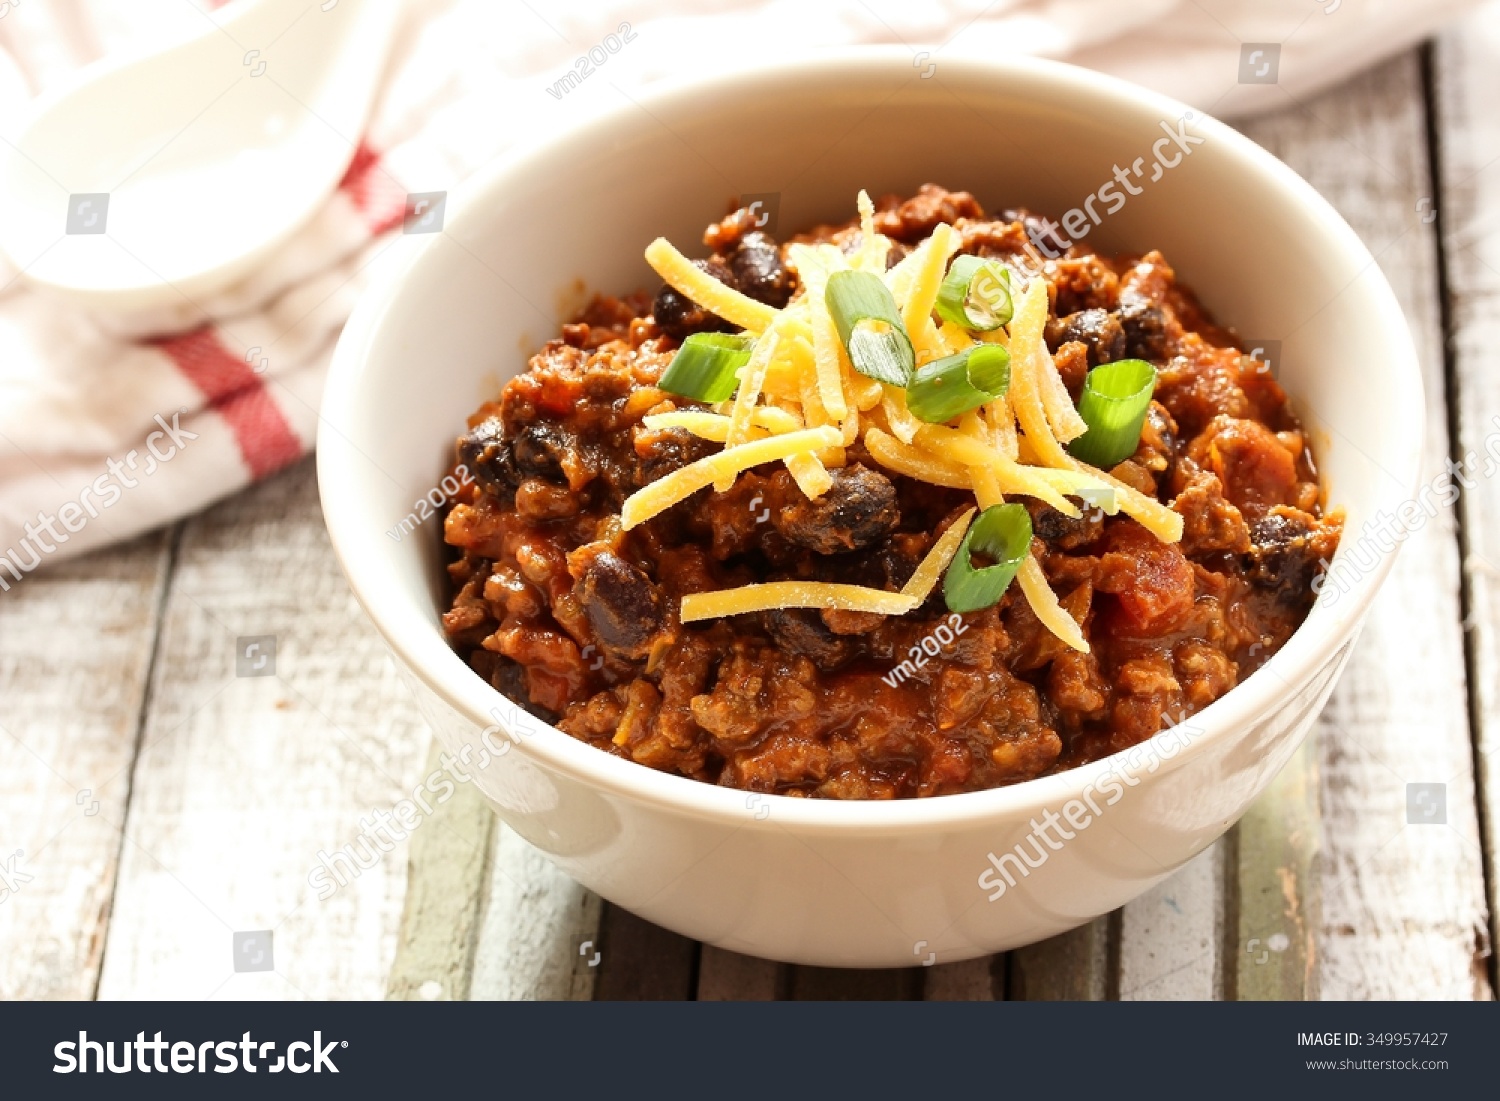 Beef chili  / Bowl of beef chili with cheddar cheese on top #349957427